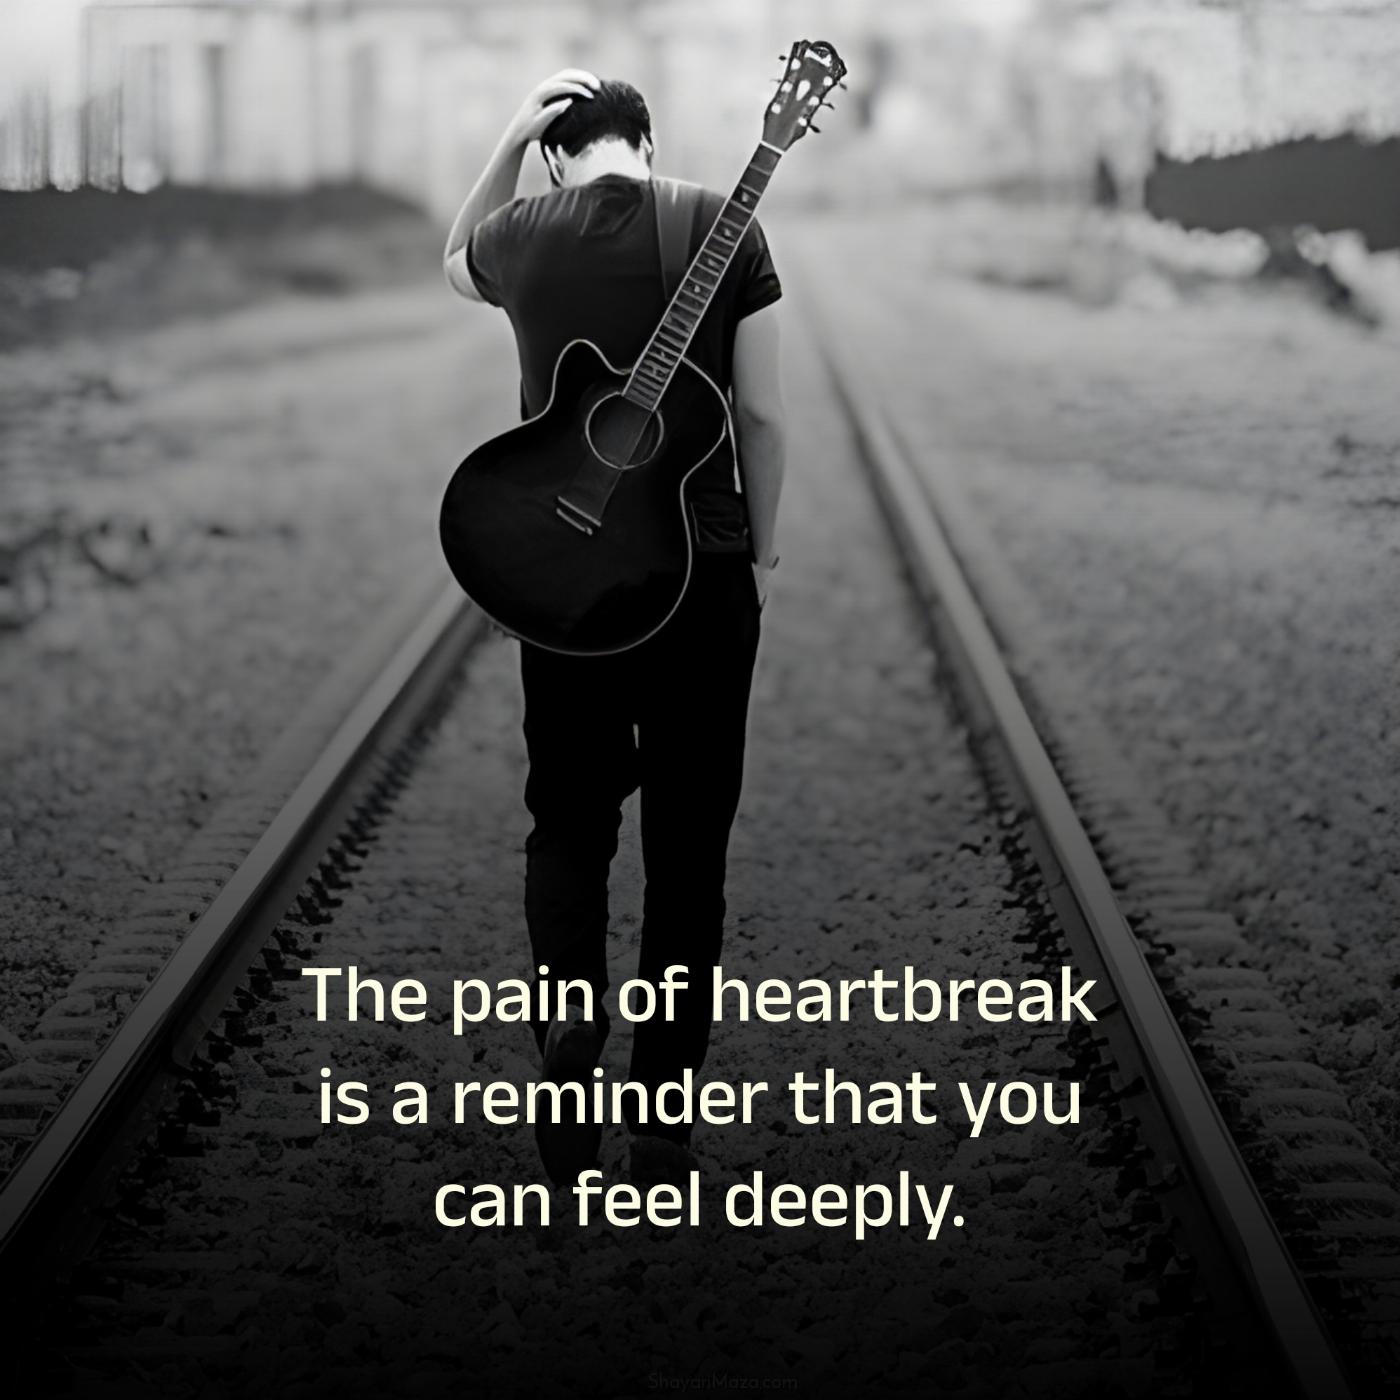 The pain of heartbreak is a reminder that you can feel deeply